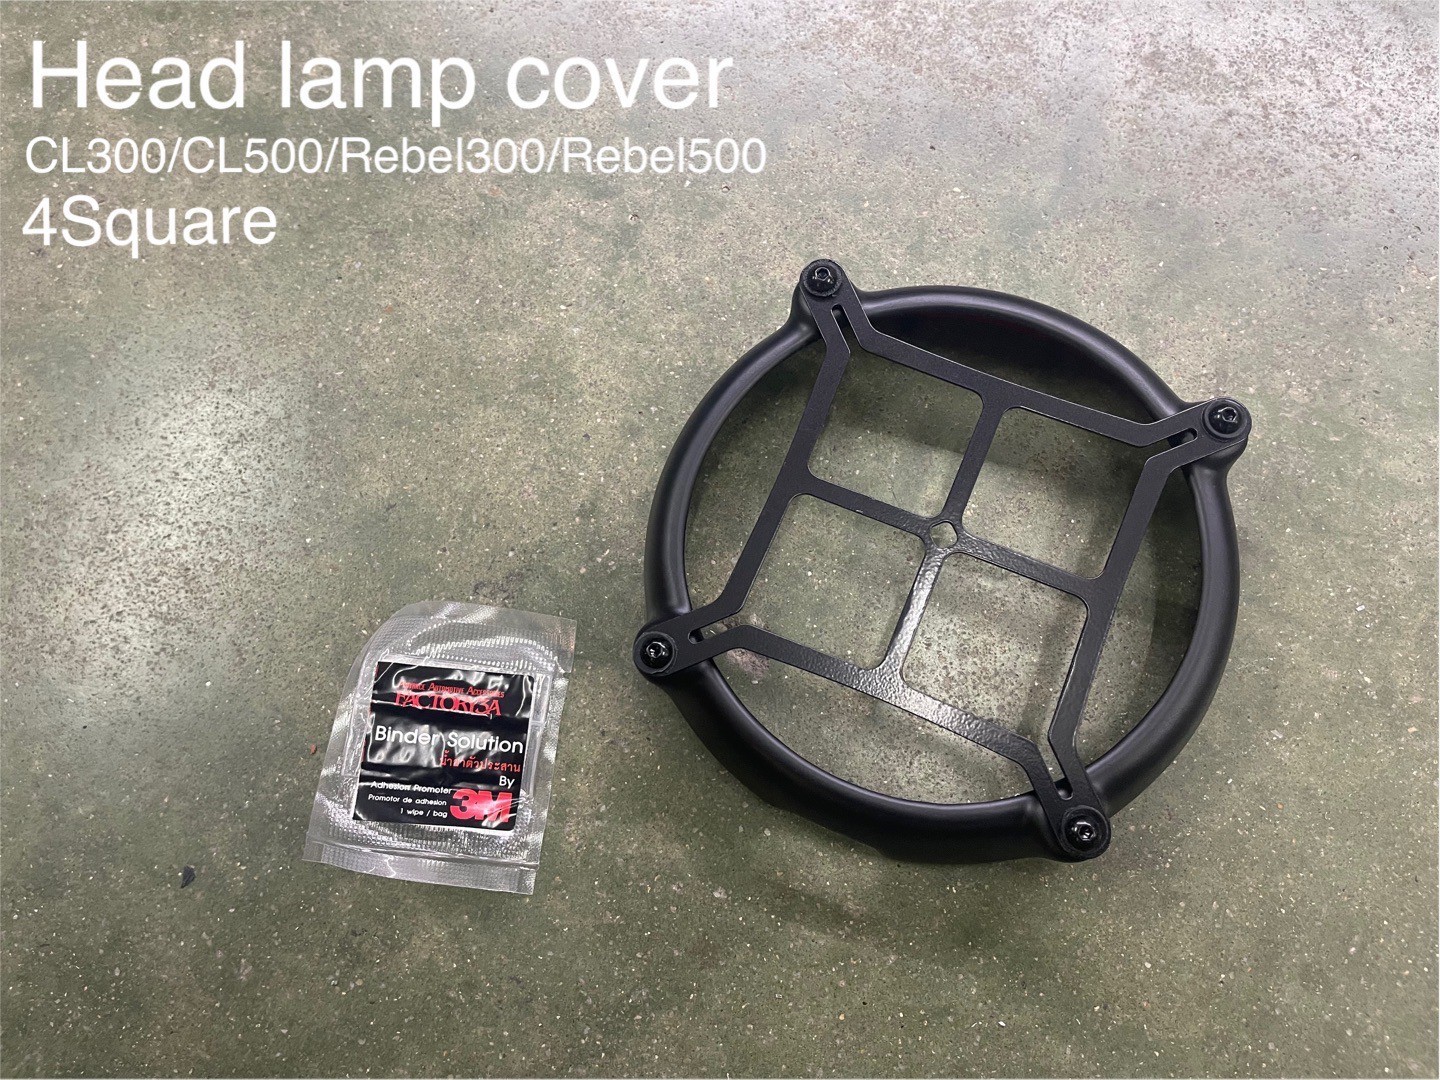  Head Lamp Cover Motolord V.1 For Honda CL300 / CL500